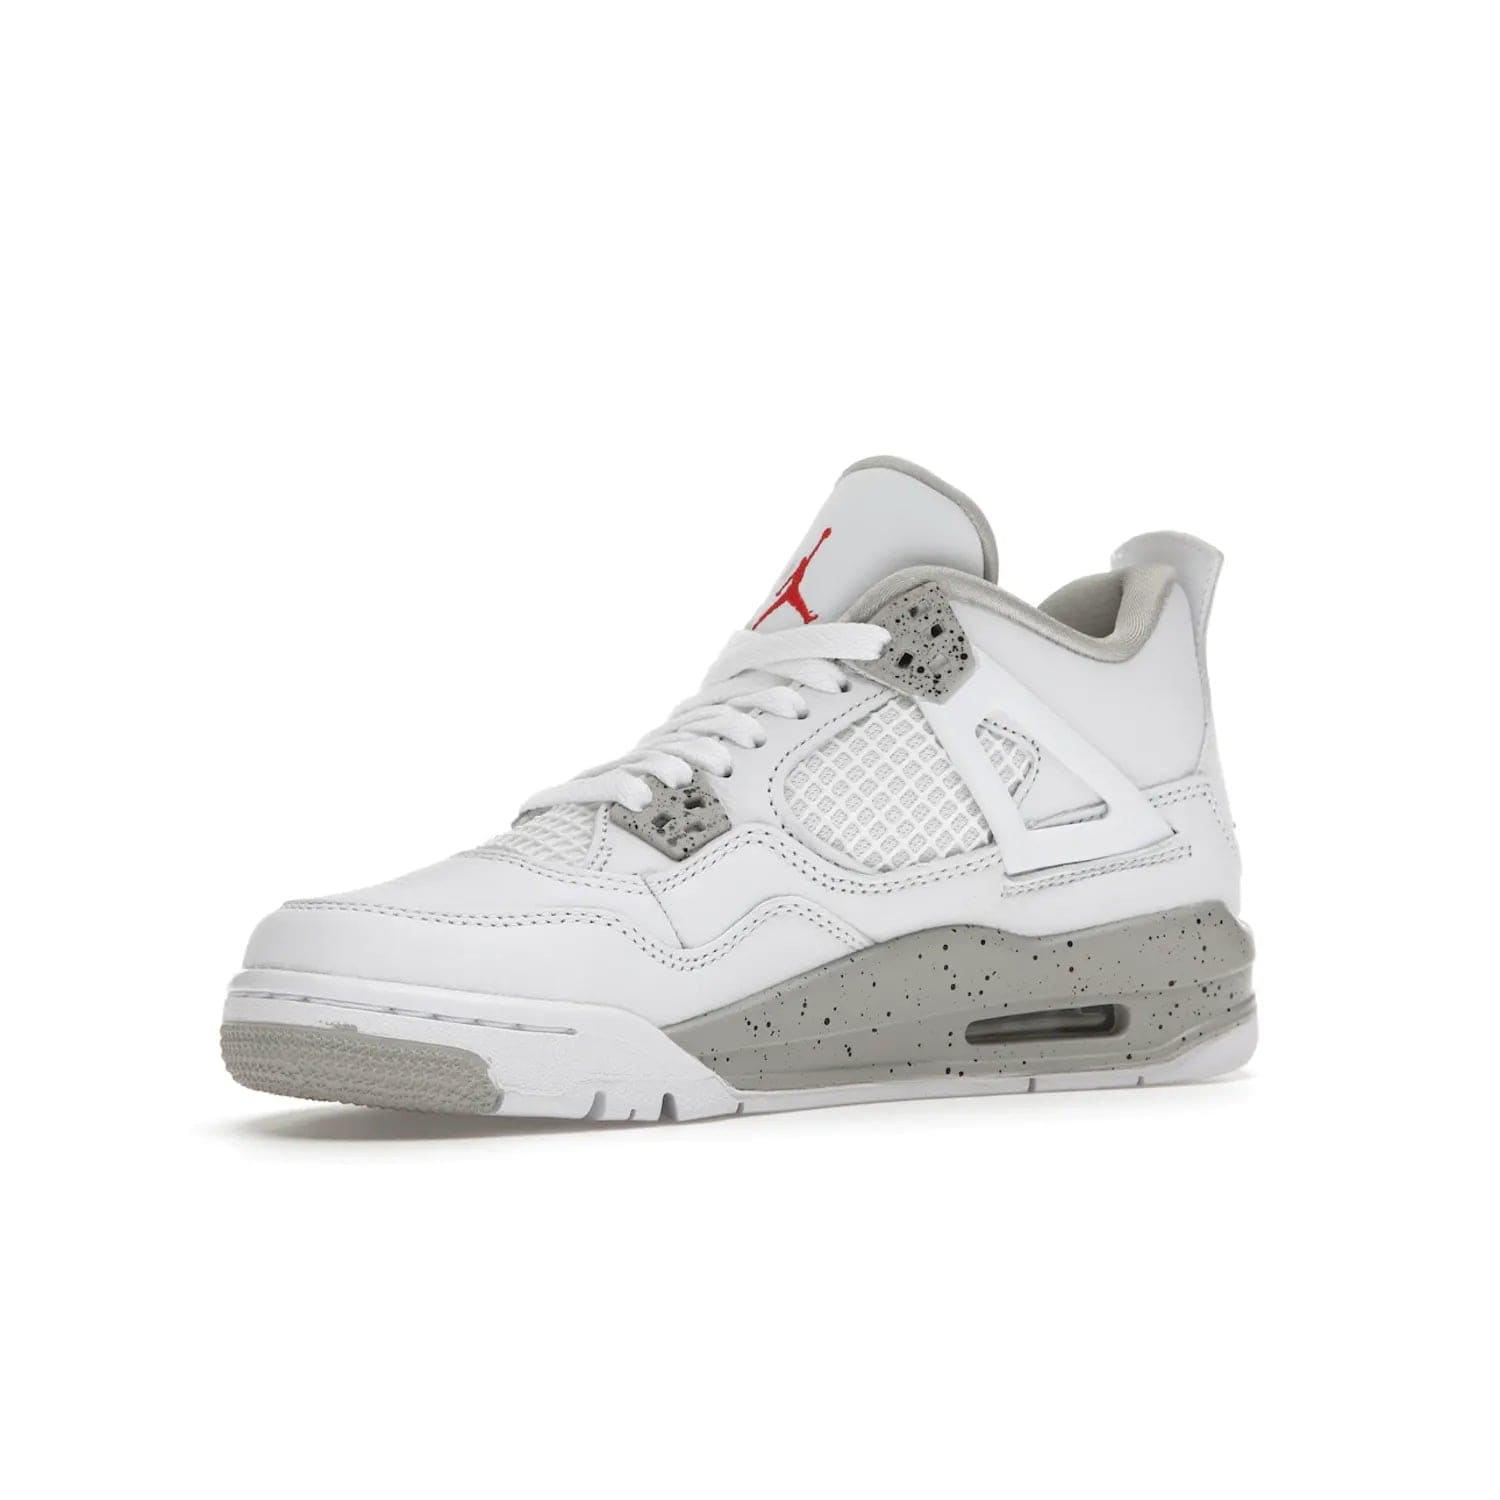 Jordan 4 Retro White Oreo (2021) (GS) - Image 16 - Only at www.BallersClubKickz.com - White Oreo Air Jordan 4 Retro 2021 GS - Iconic sneaker silhouette with white canvas upper, Tech Grey detailing, and Fire Red accents. Available July 2021.